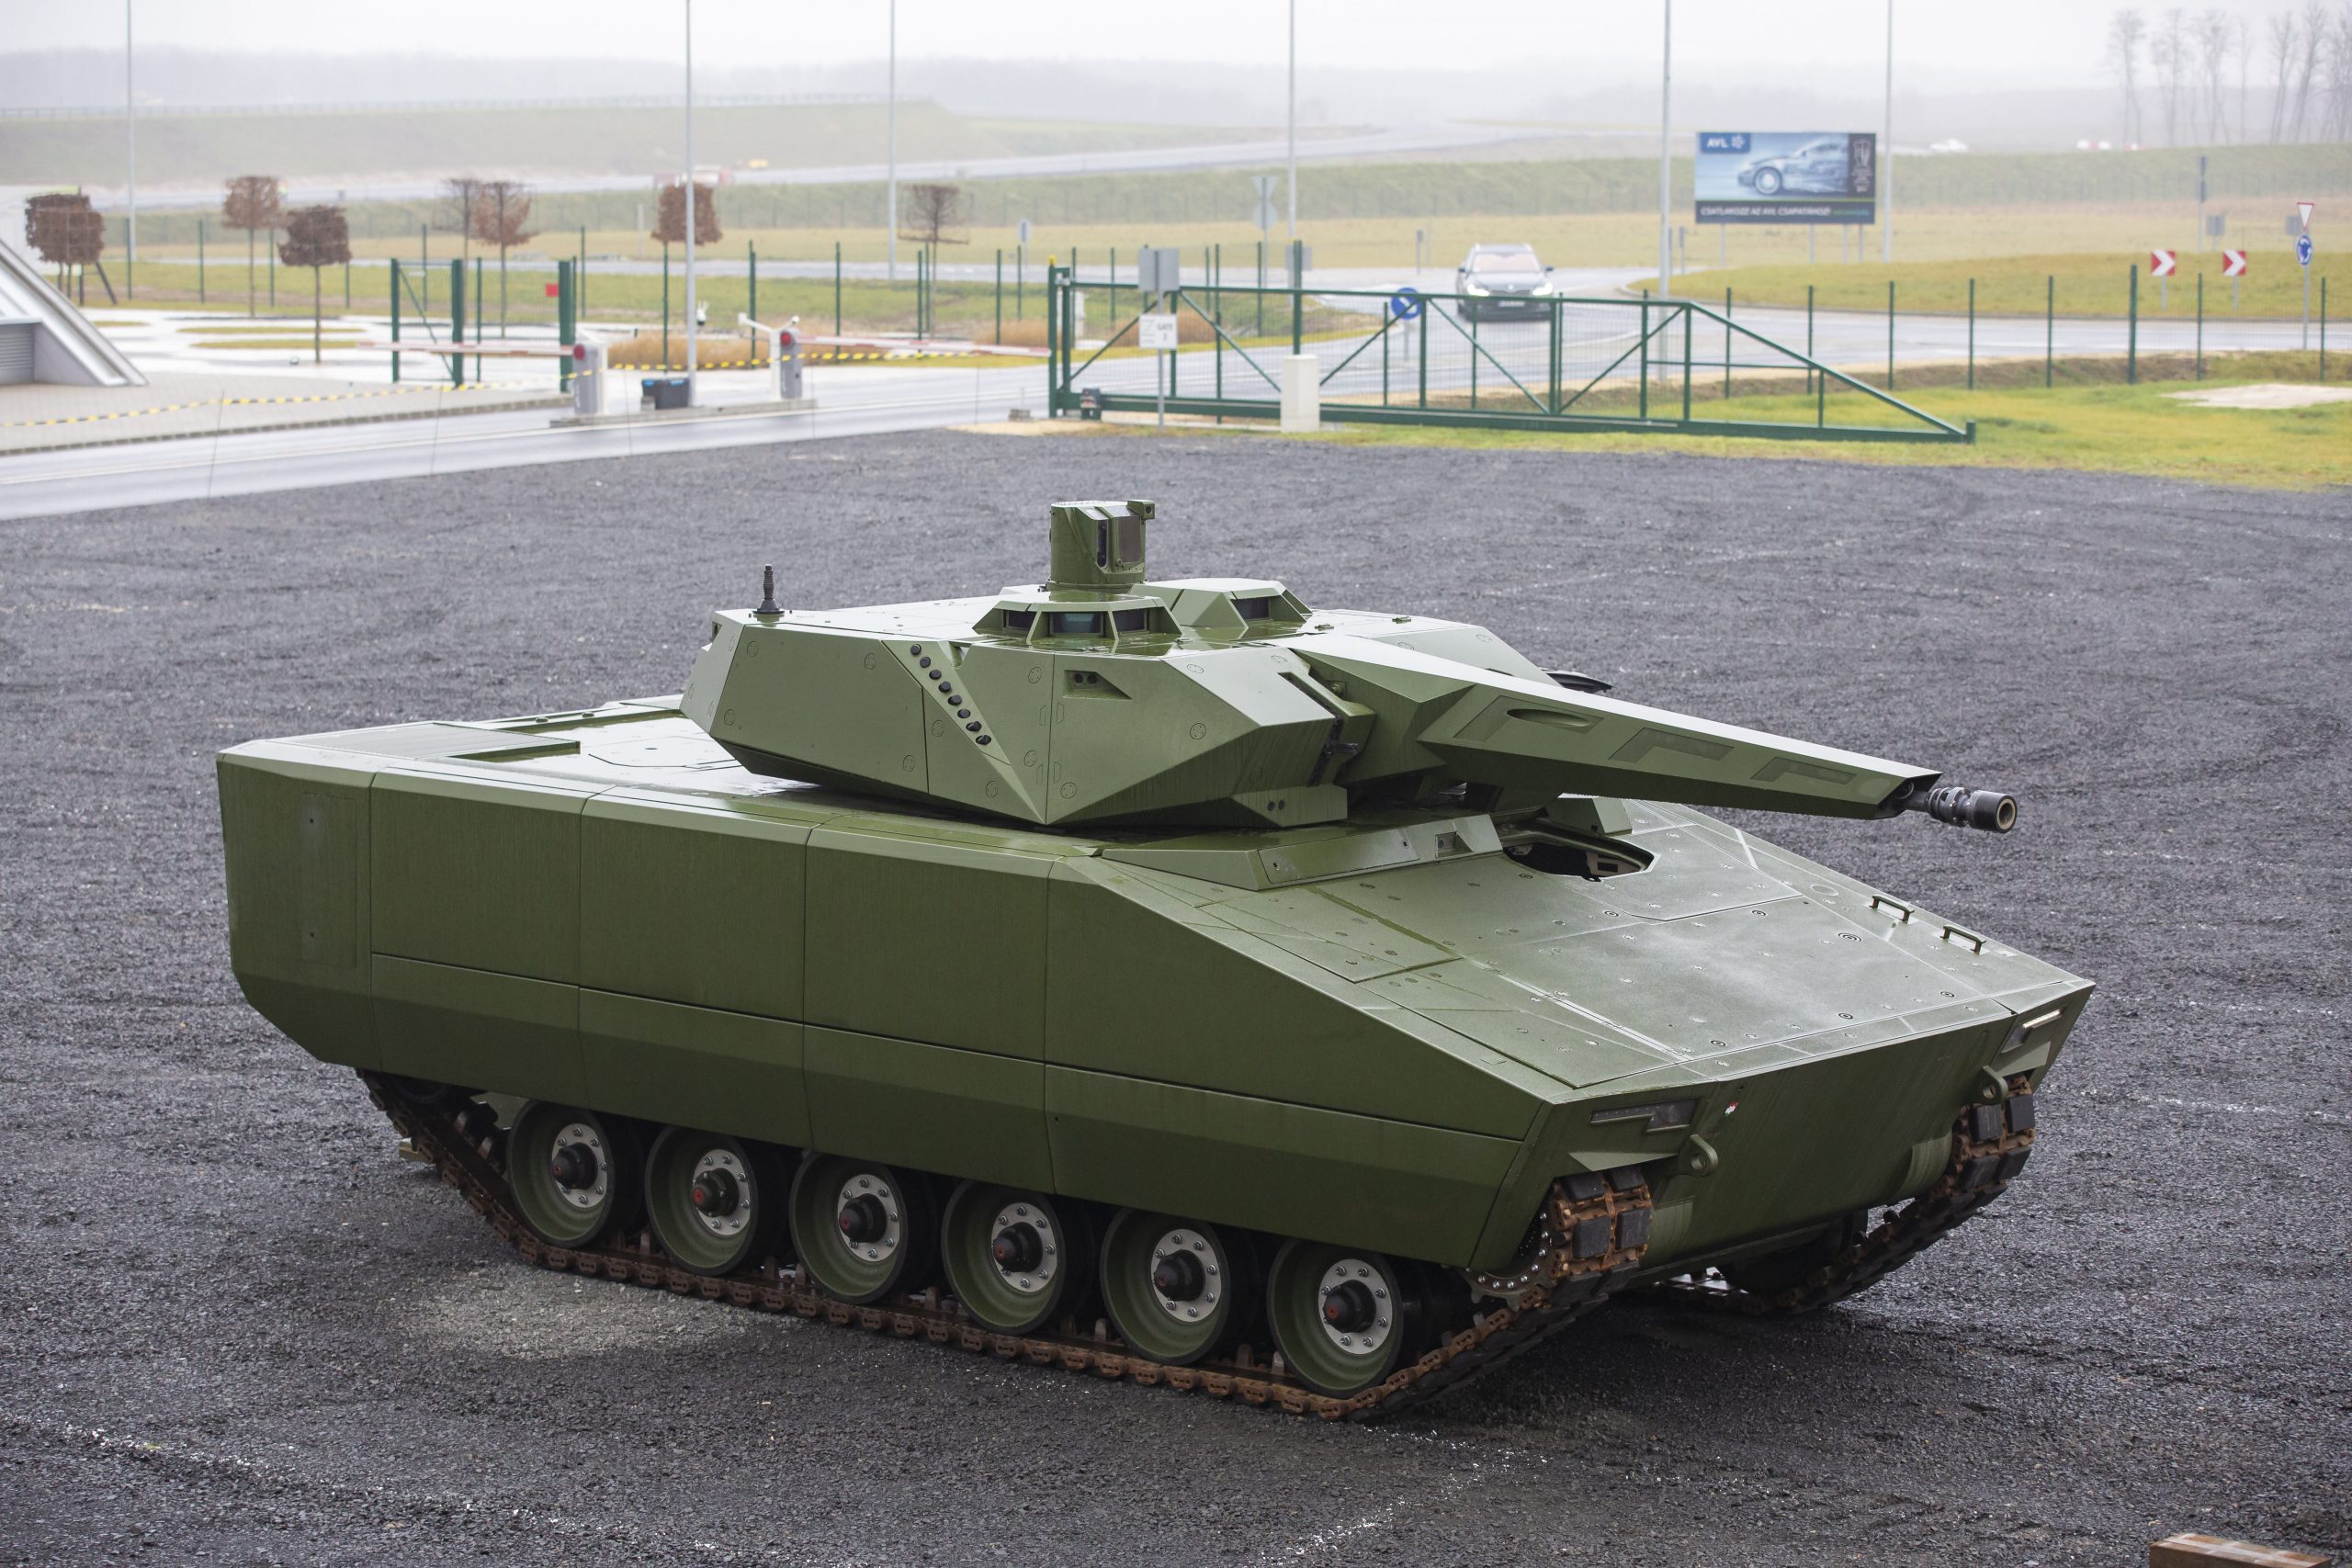 Cornerstone Laid for Plant to Make Lynx Armoured Fighting Vehicles